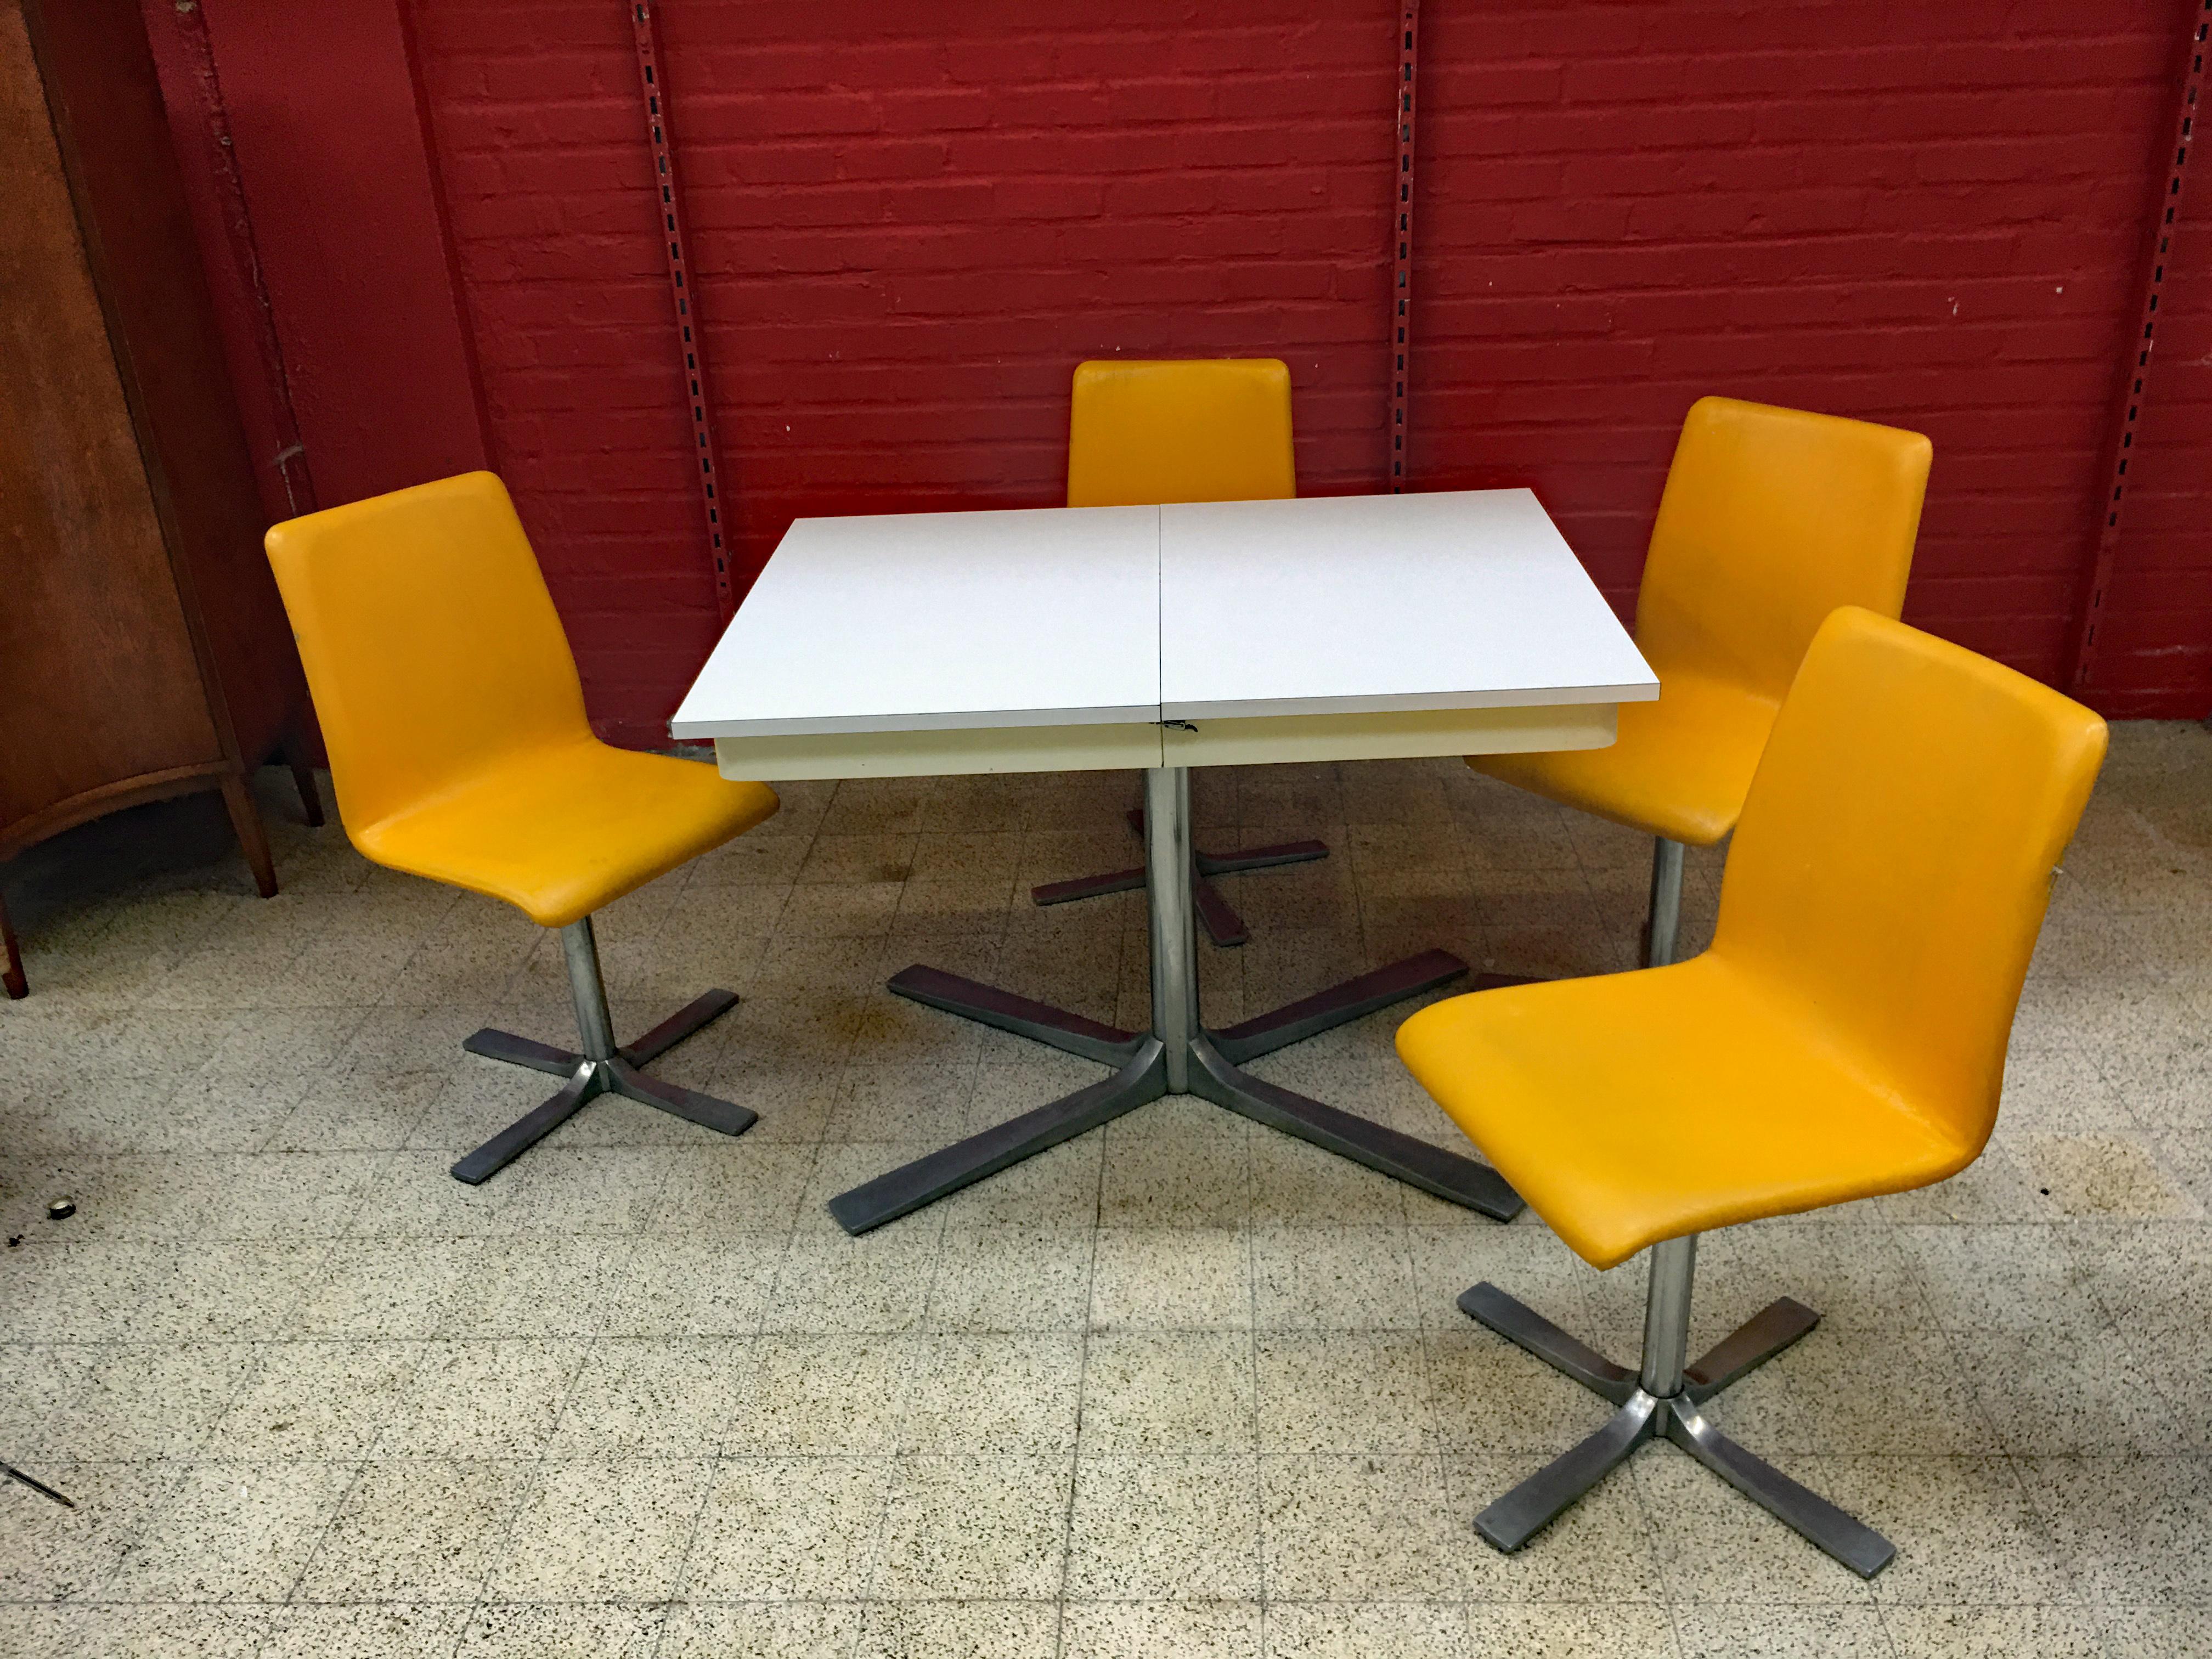 Typical French kitchen set from the 60s.
1 table with integrated extensions and 4 seats.
good general condition, worn seat upholstery 

Dimensions table closed : 76 x 110 x80 cm
Dimensions table opened : 76 x144 x 80 cm
Chairs : 86 x 40 x42 cm